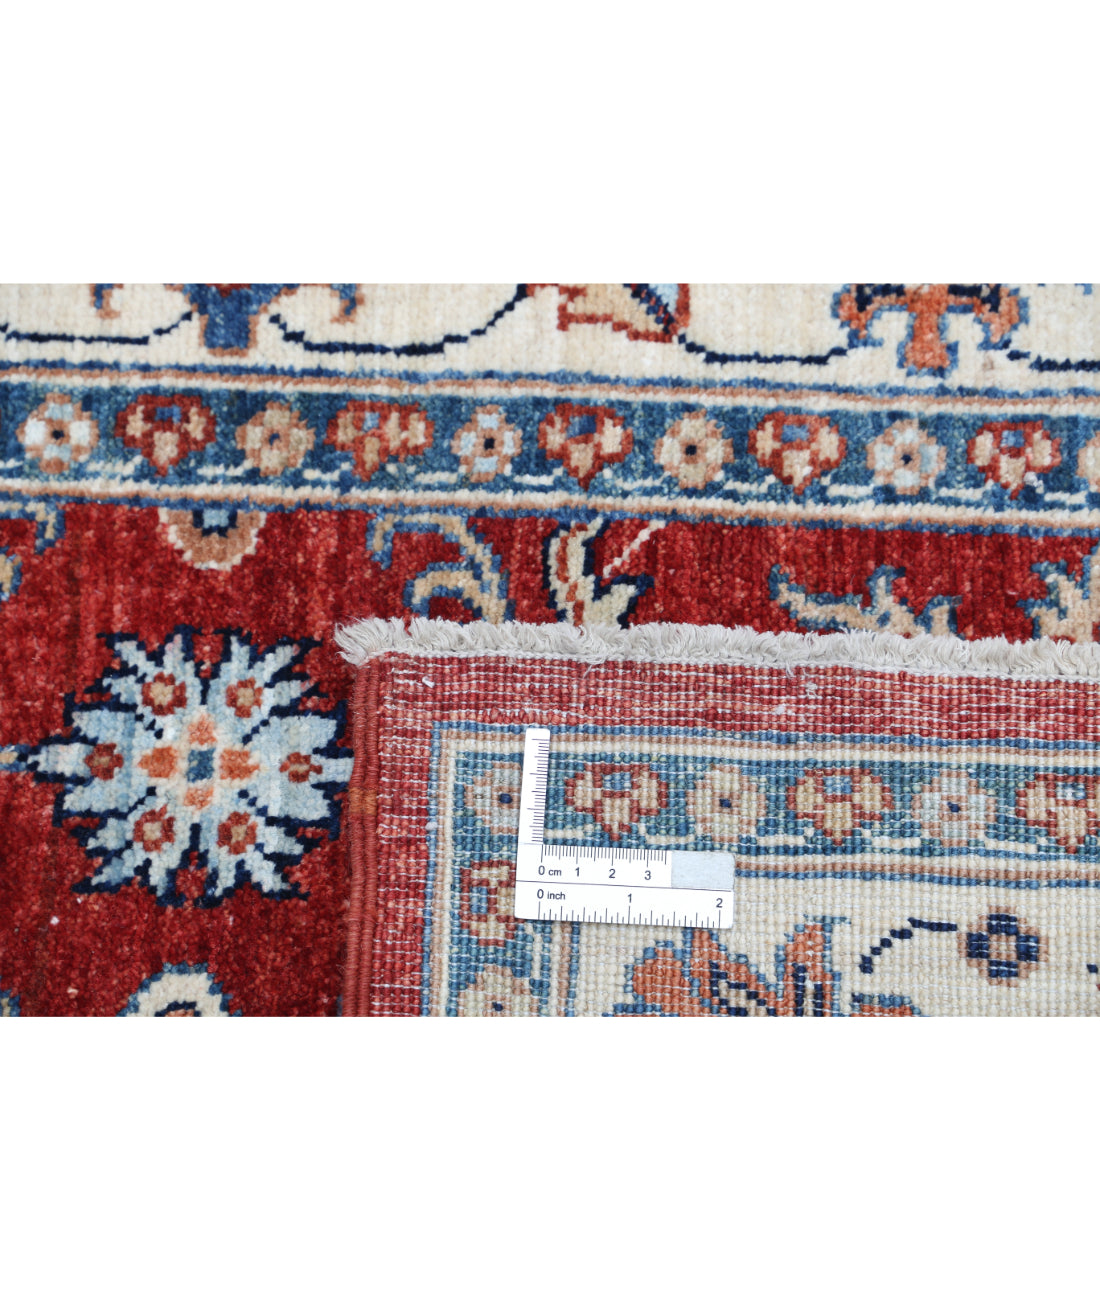 Hand Knotted Ziegler Farhan Wool Rug - 3'1'' x 4'11'' 3'1'' x 4'11'' (93 X 148) / Red / Ivory